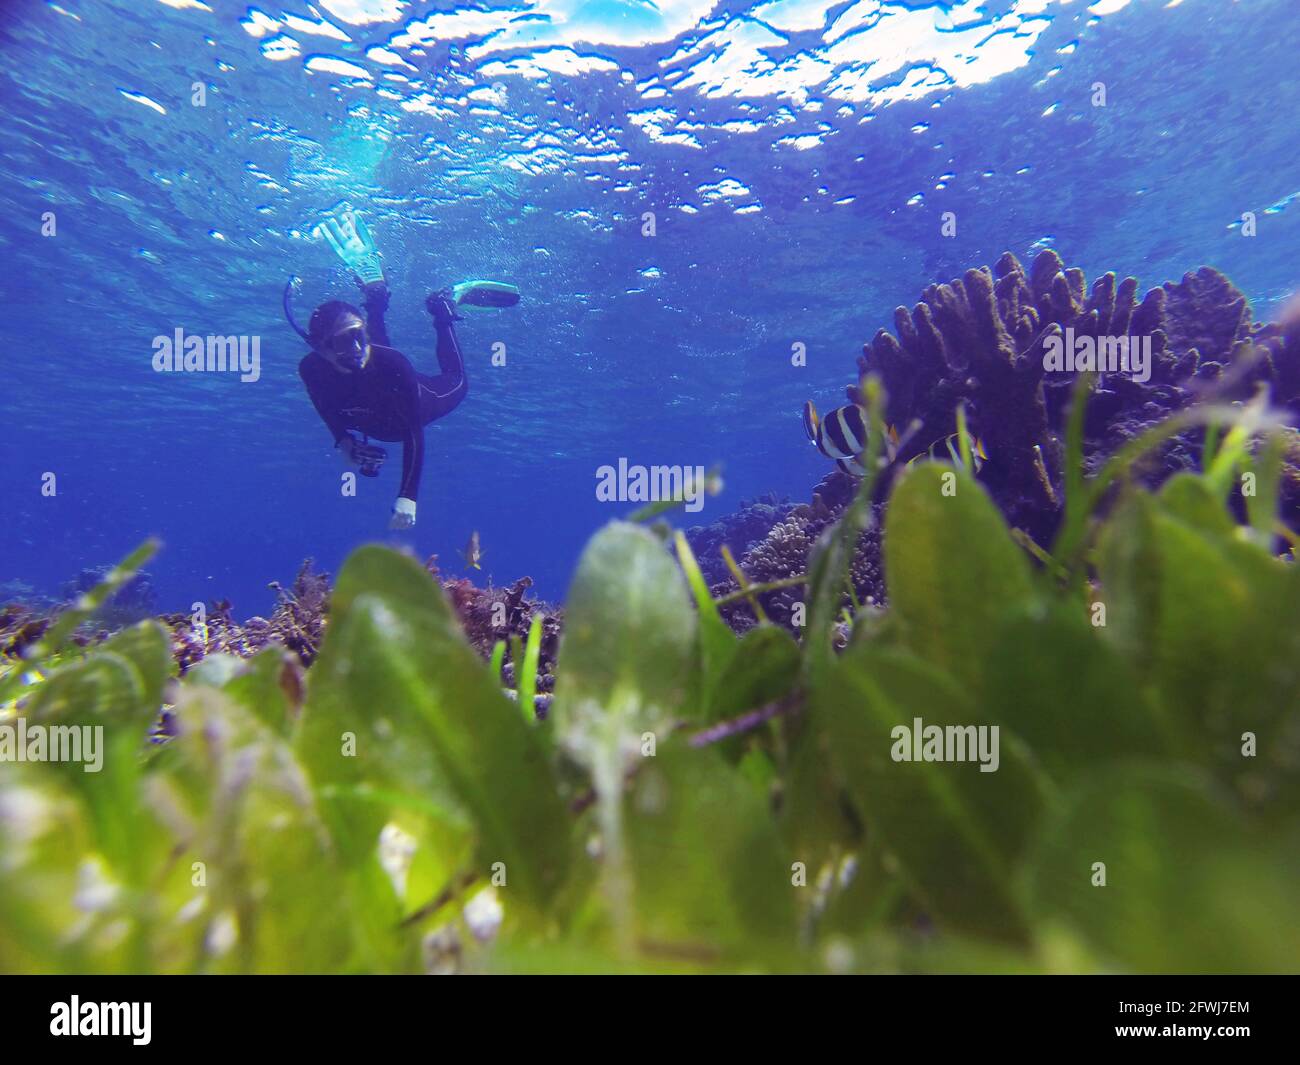 Snorkeller underwater with seagrass, healthy corals and fish, North Bay sanctuary zone, Lord Howe Island, NSW, Australia. No MR or PR Stock Photo